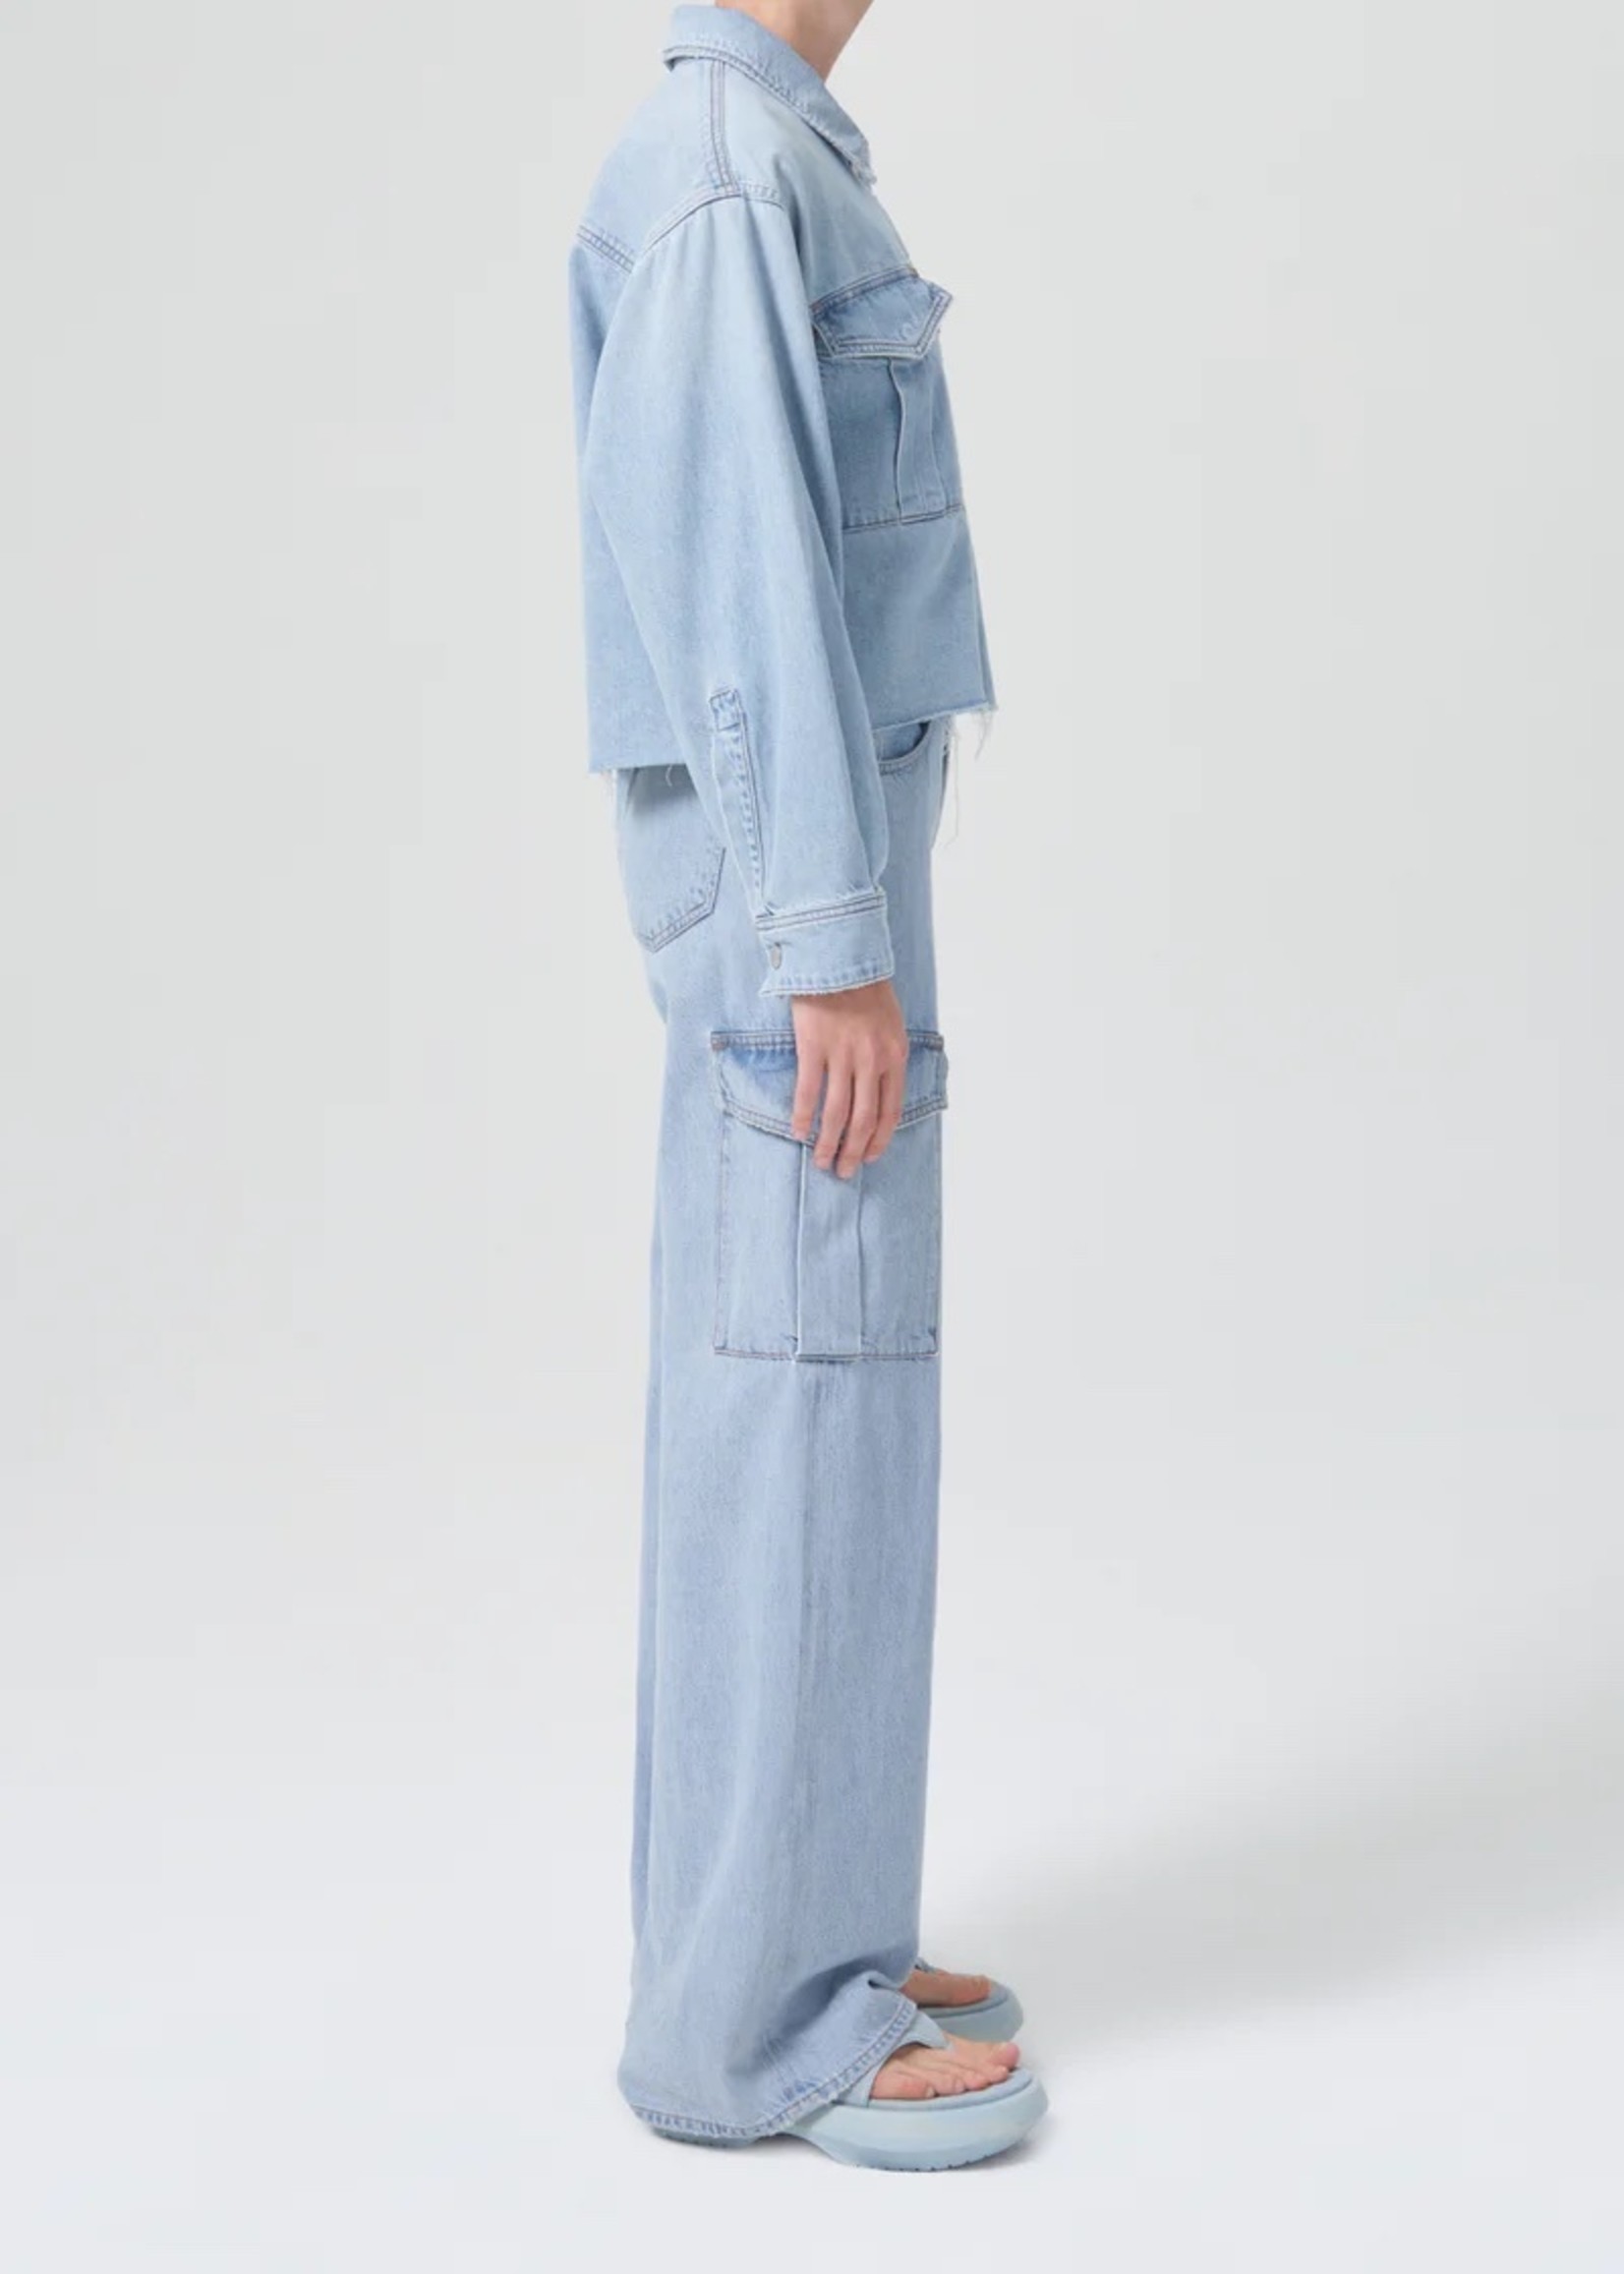 AGOLDE Nyx Cropped Denim Shirt in Realm